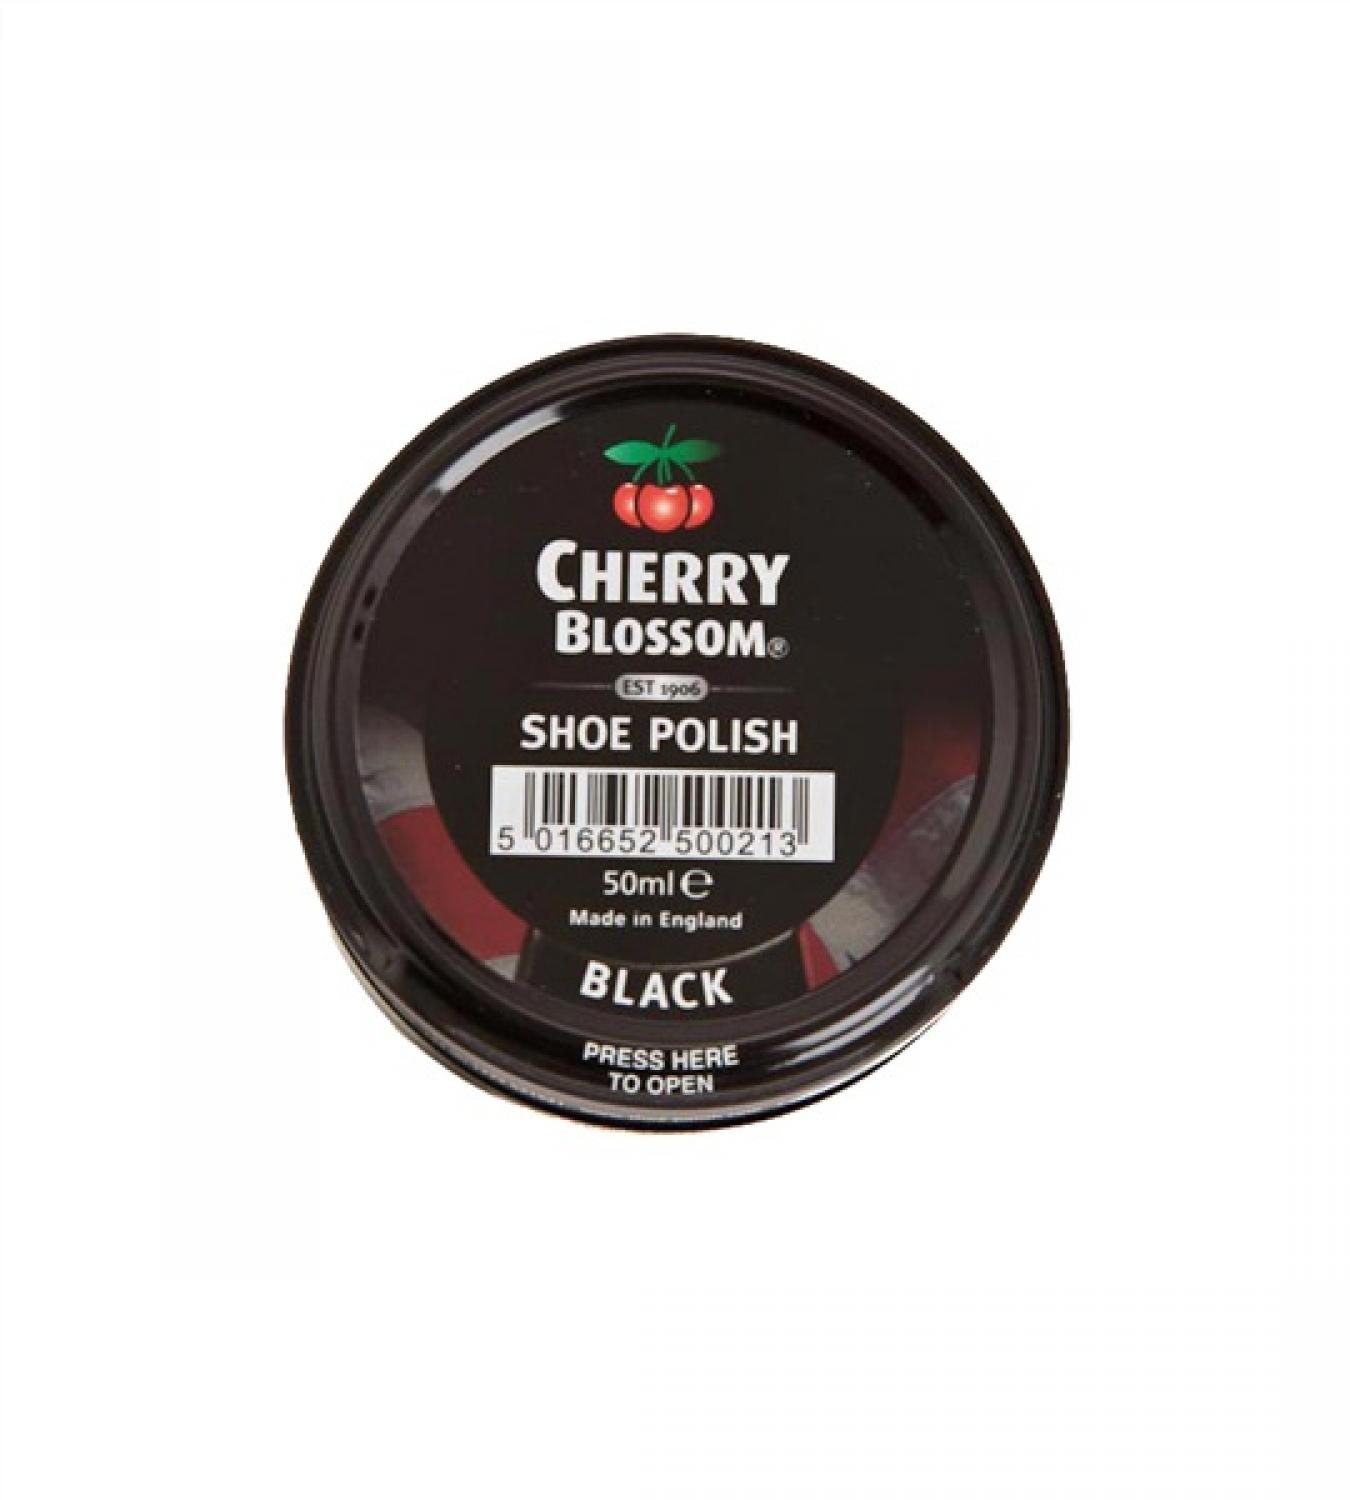 Buy Cherry Blossom Shoe Polish Black from Fane Valley Stores